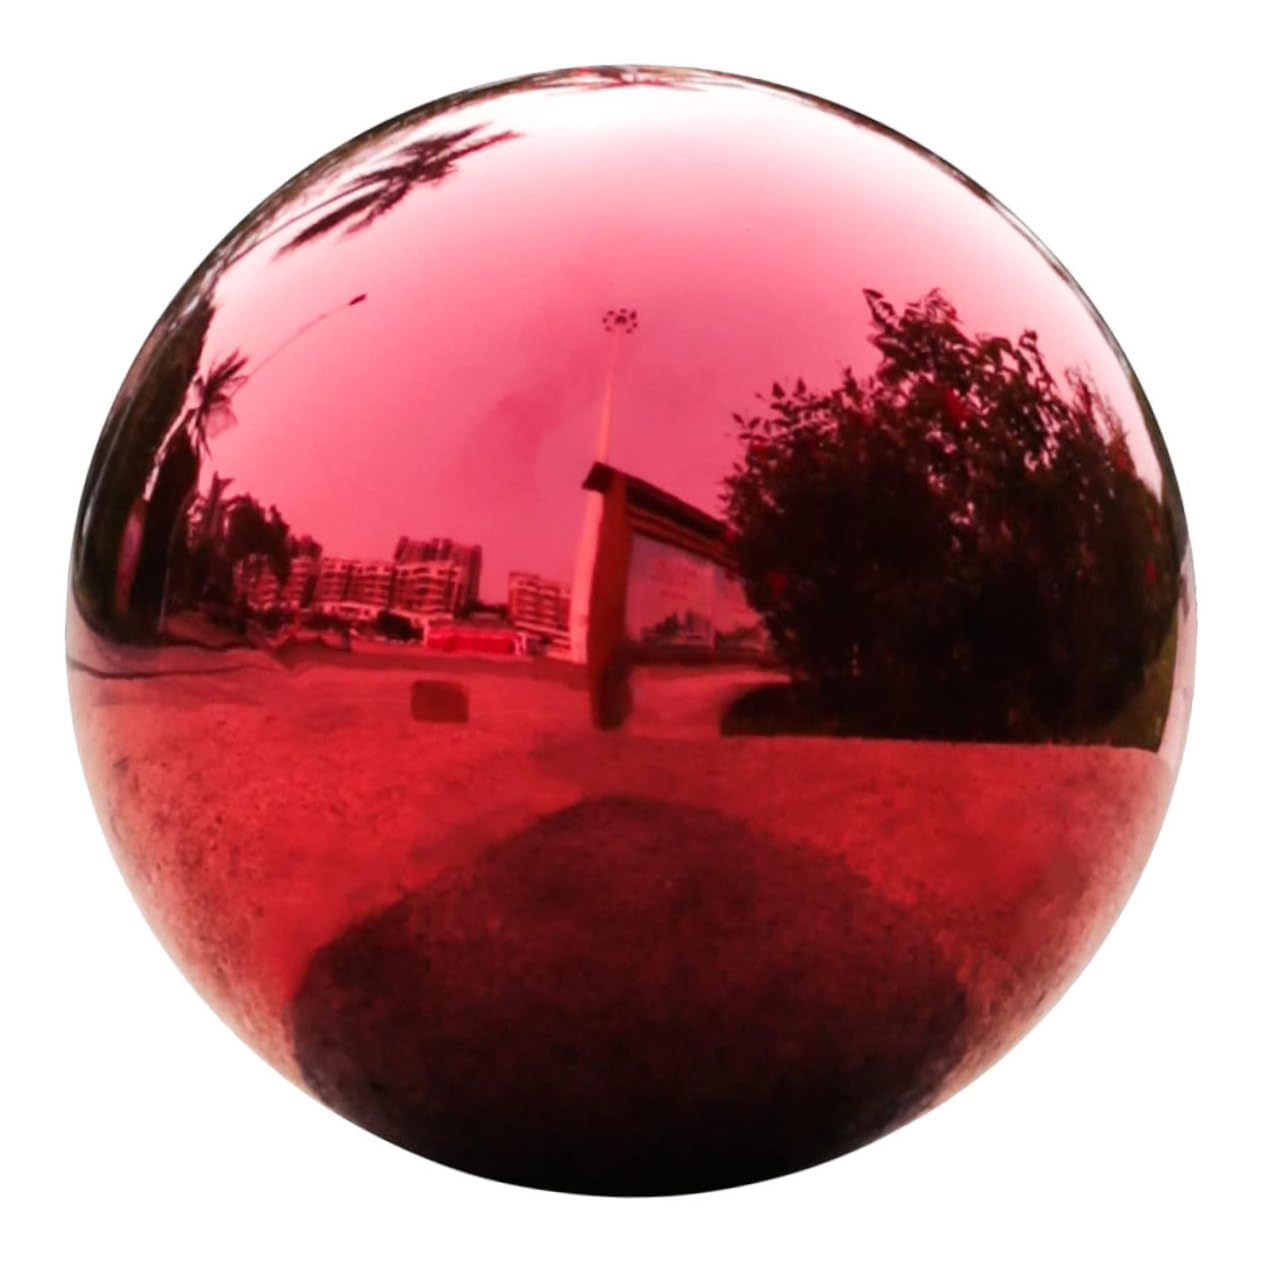 OFFSCH Garden Reflective Ball Red Decorations Outside House Decor Outdoor Decorations Mirror Polished Ball Colored Gazing Ball Garden Hollow Ball Mirror Gazing Ball Garden Reflection Ball Red 13.5x13.5cm